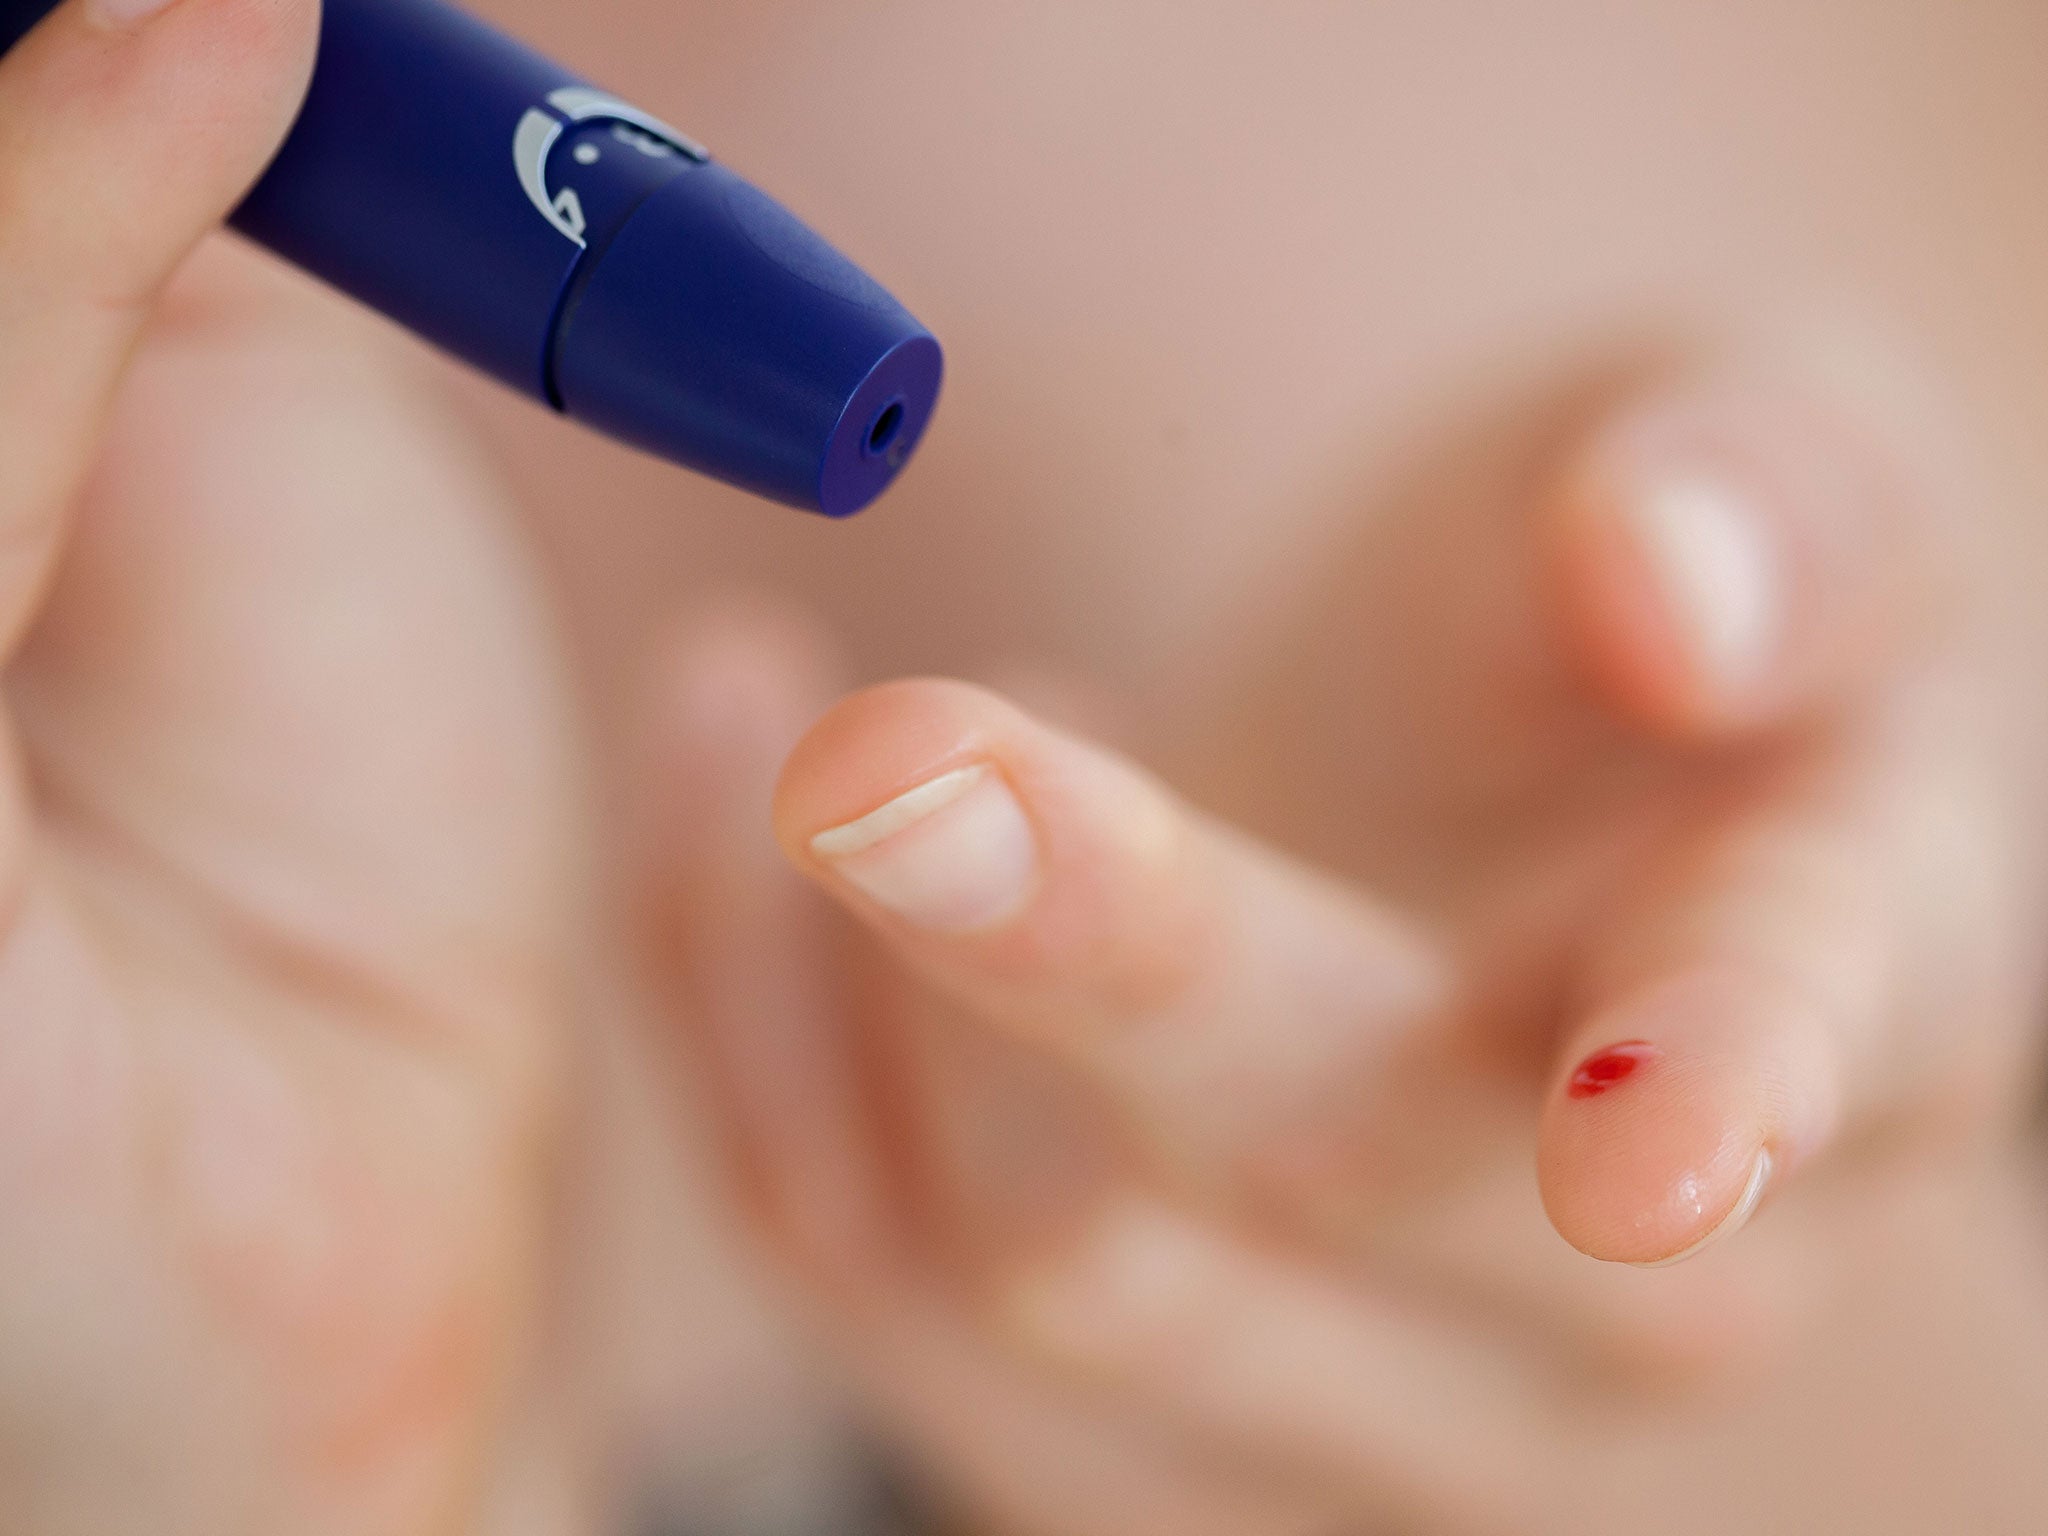 Type 1 diabetes affects 400,000 people in the UK